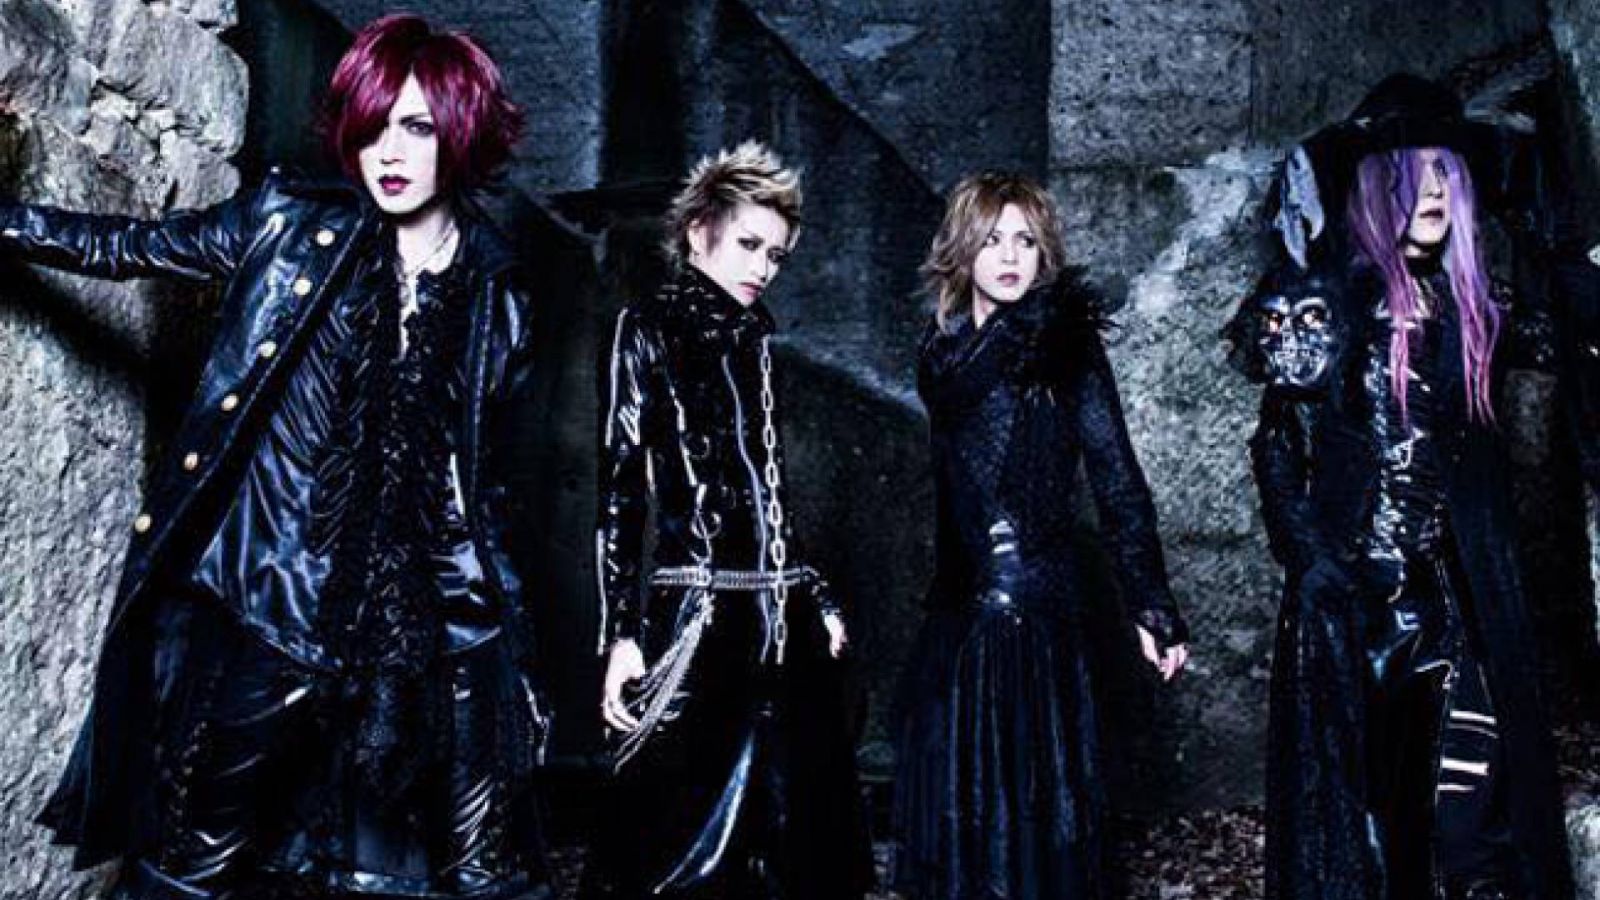 Novo single do DIAURA © Ains. All rights reserved.